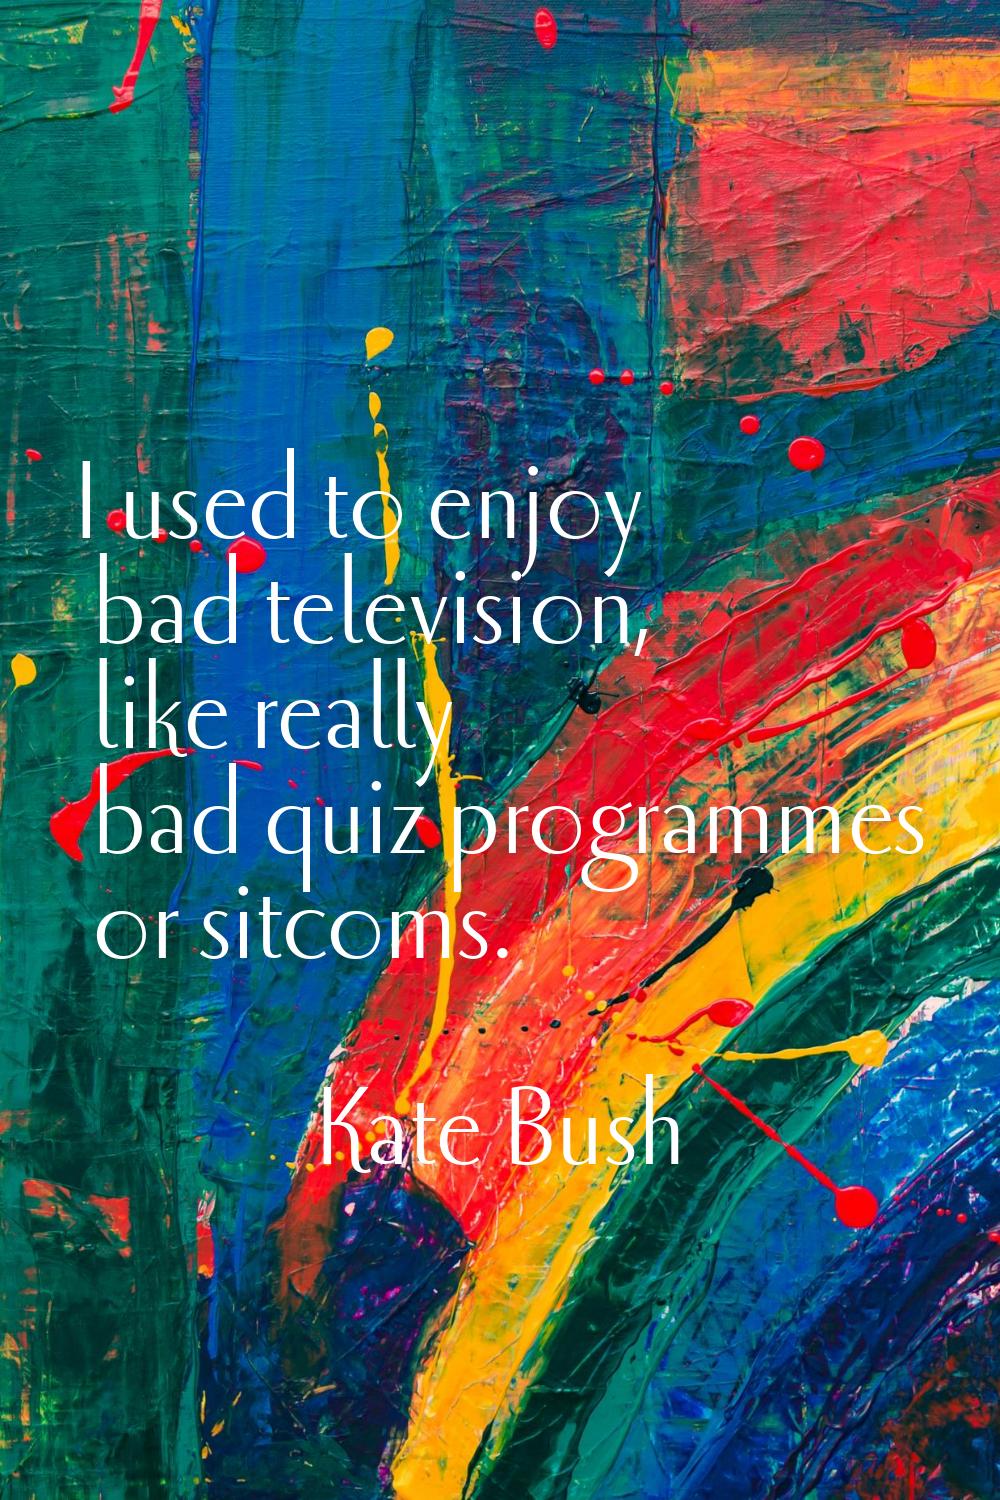 I used to enjoy bad television, like really bad quiz programmes or sitcoms.